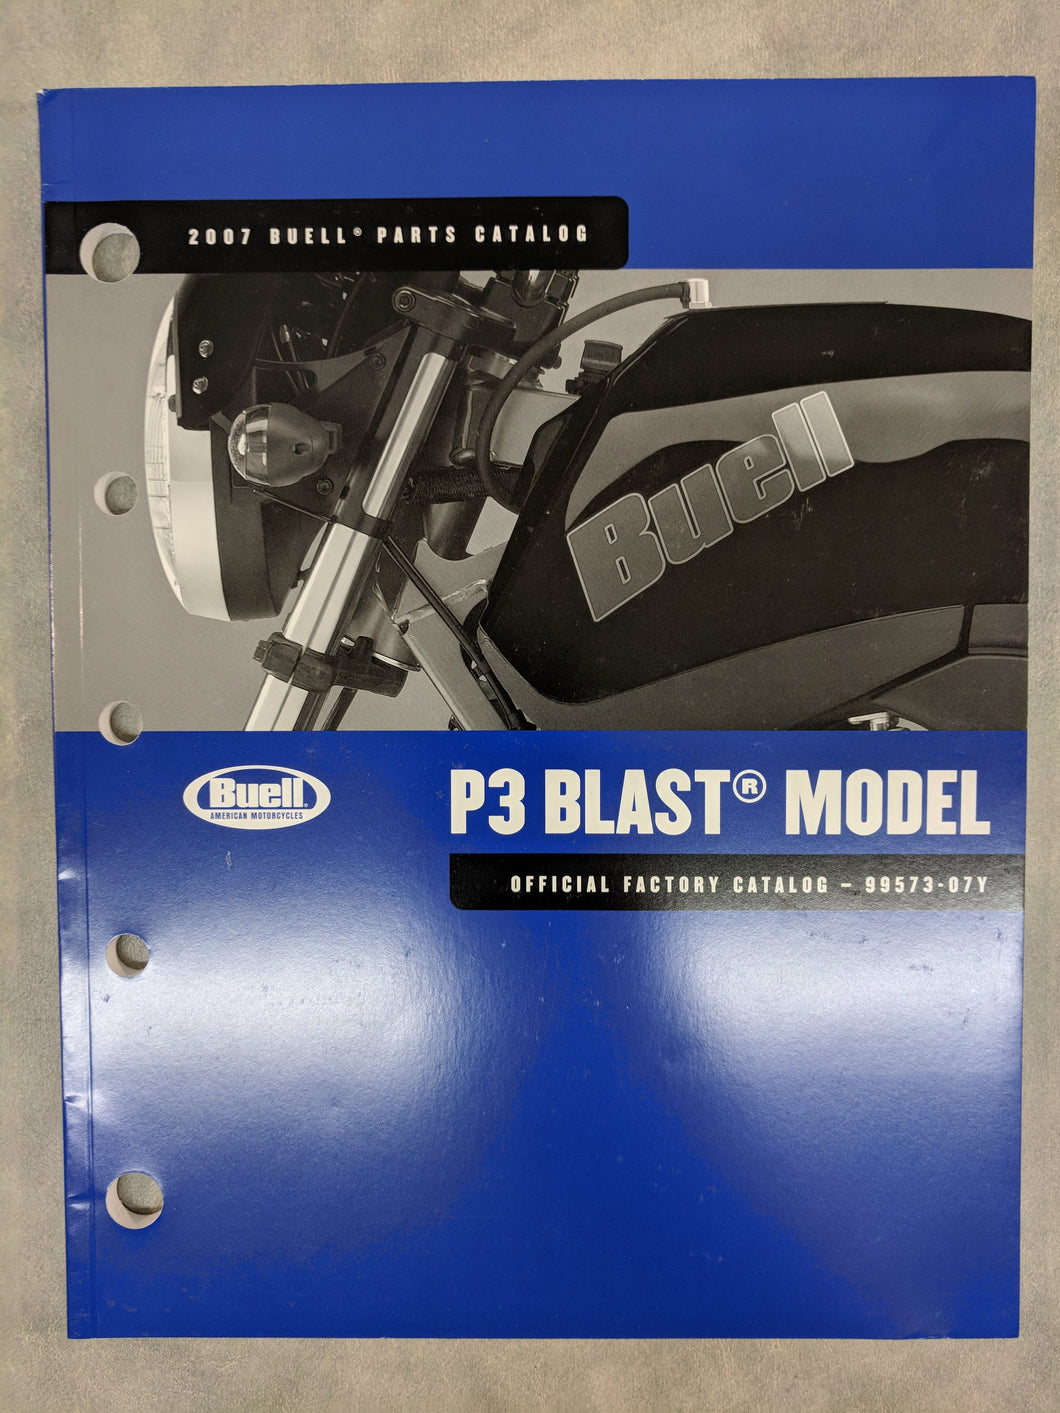 99573-07Y Buell P3 Blast Model - Official Factory Parts Catalog - 2007